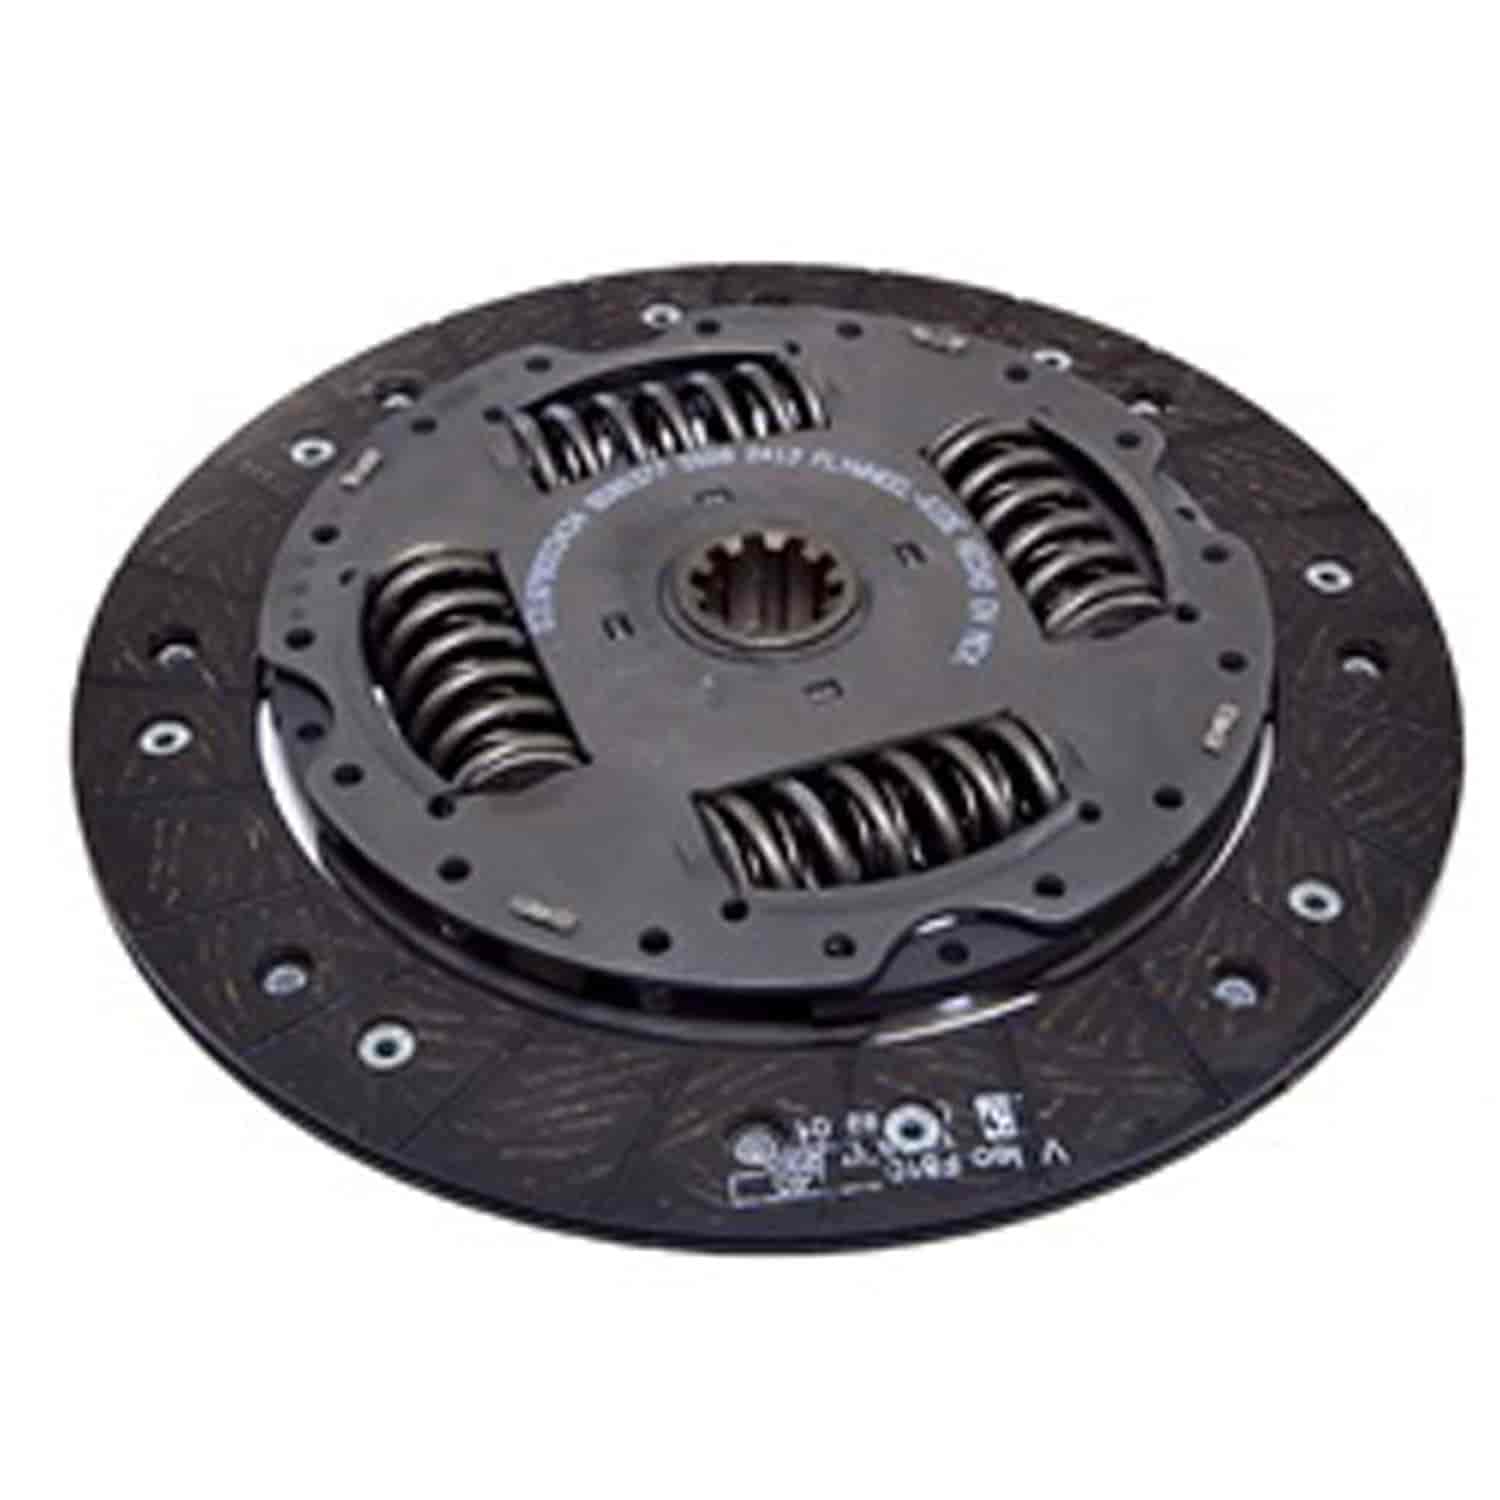 Replacement clutch disc from Omix-ADA, Fits 02-04 Jeep Libertys with a 3.7L engine.